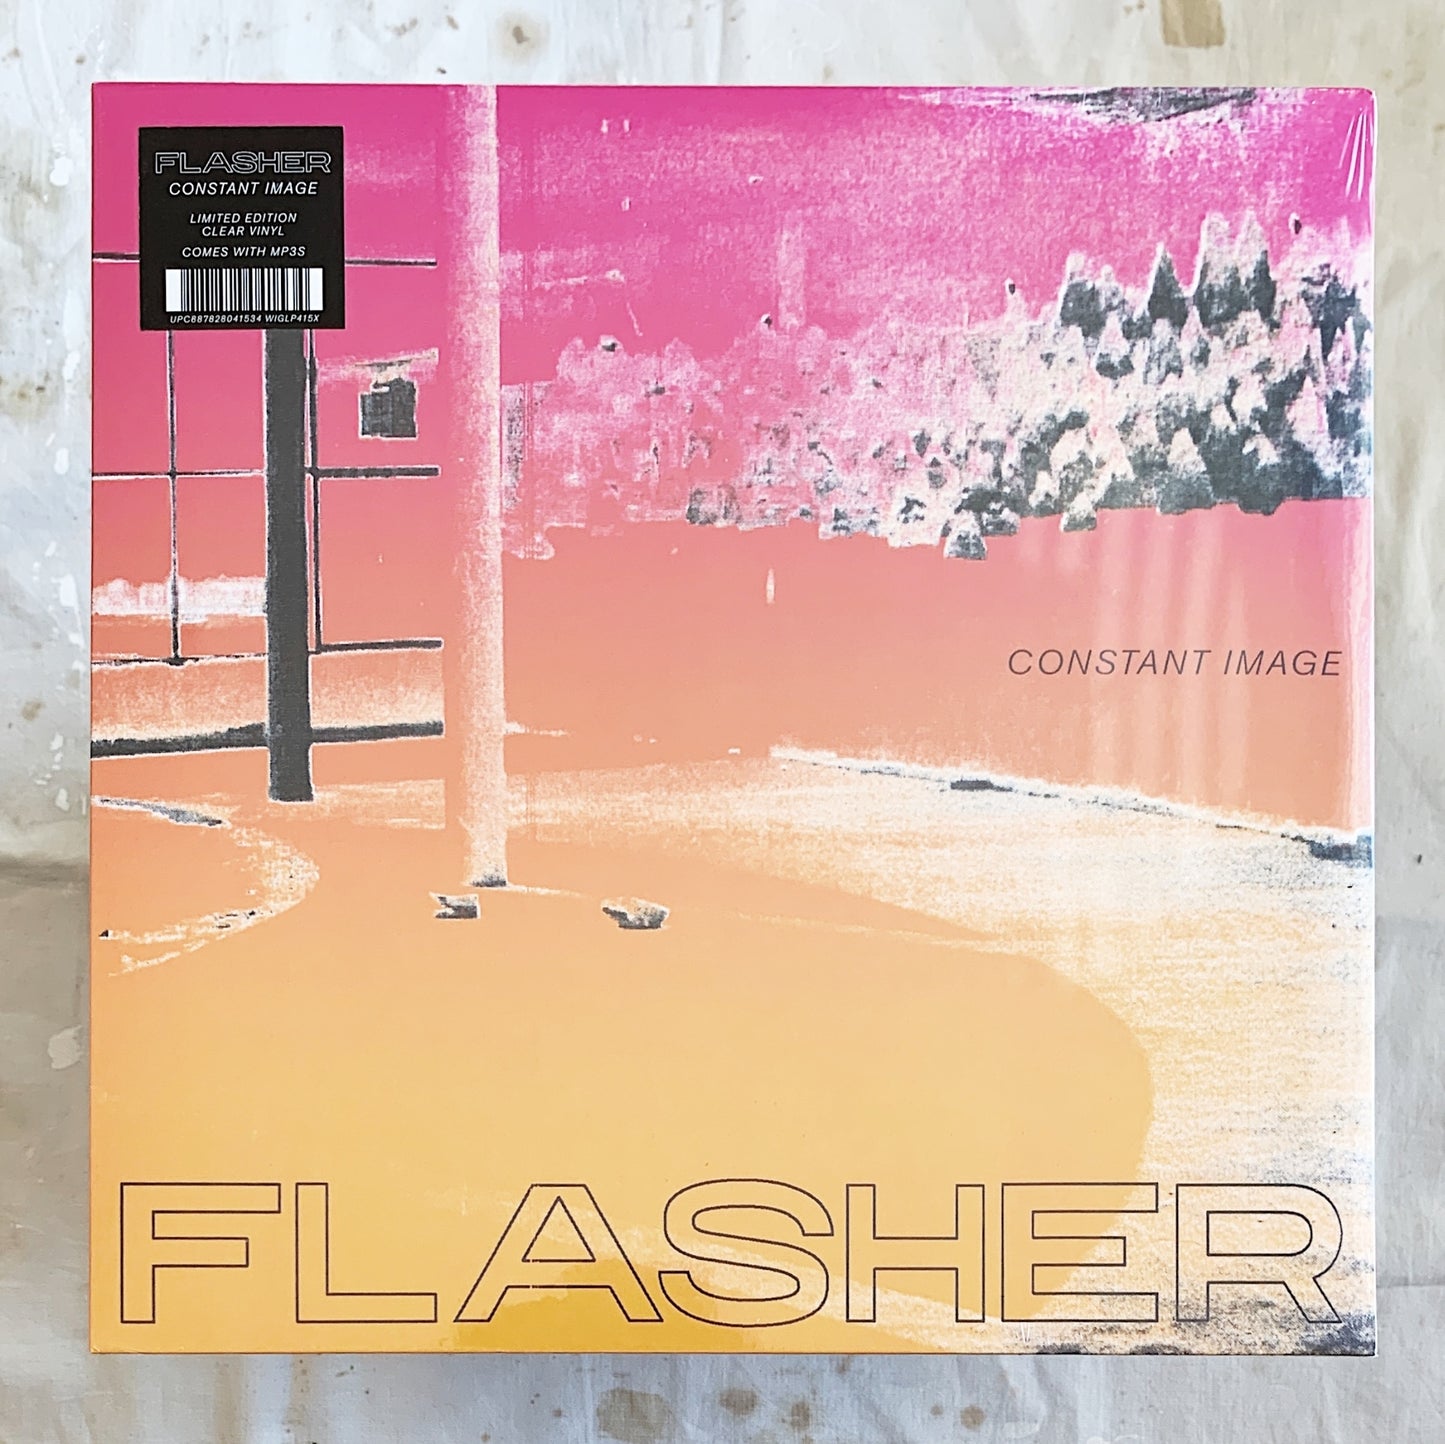 Flasher / Constant Image LP